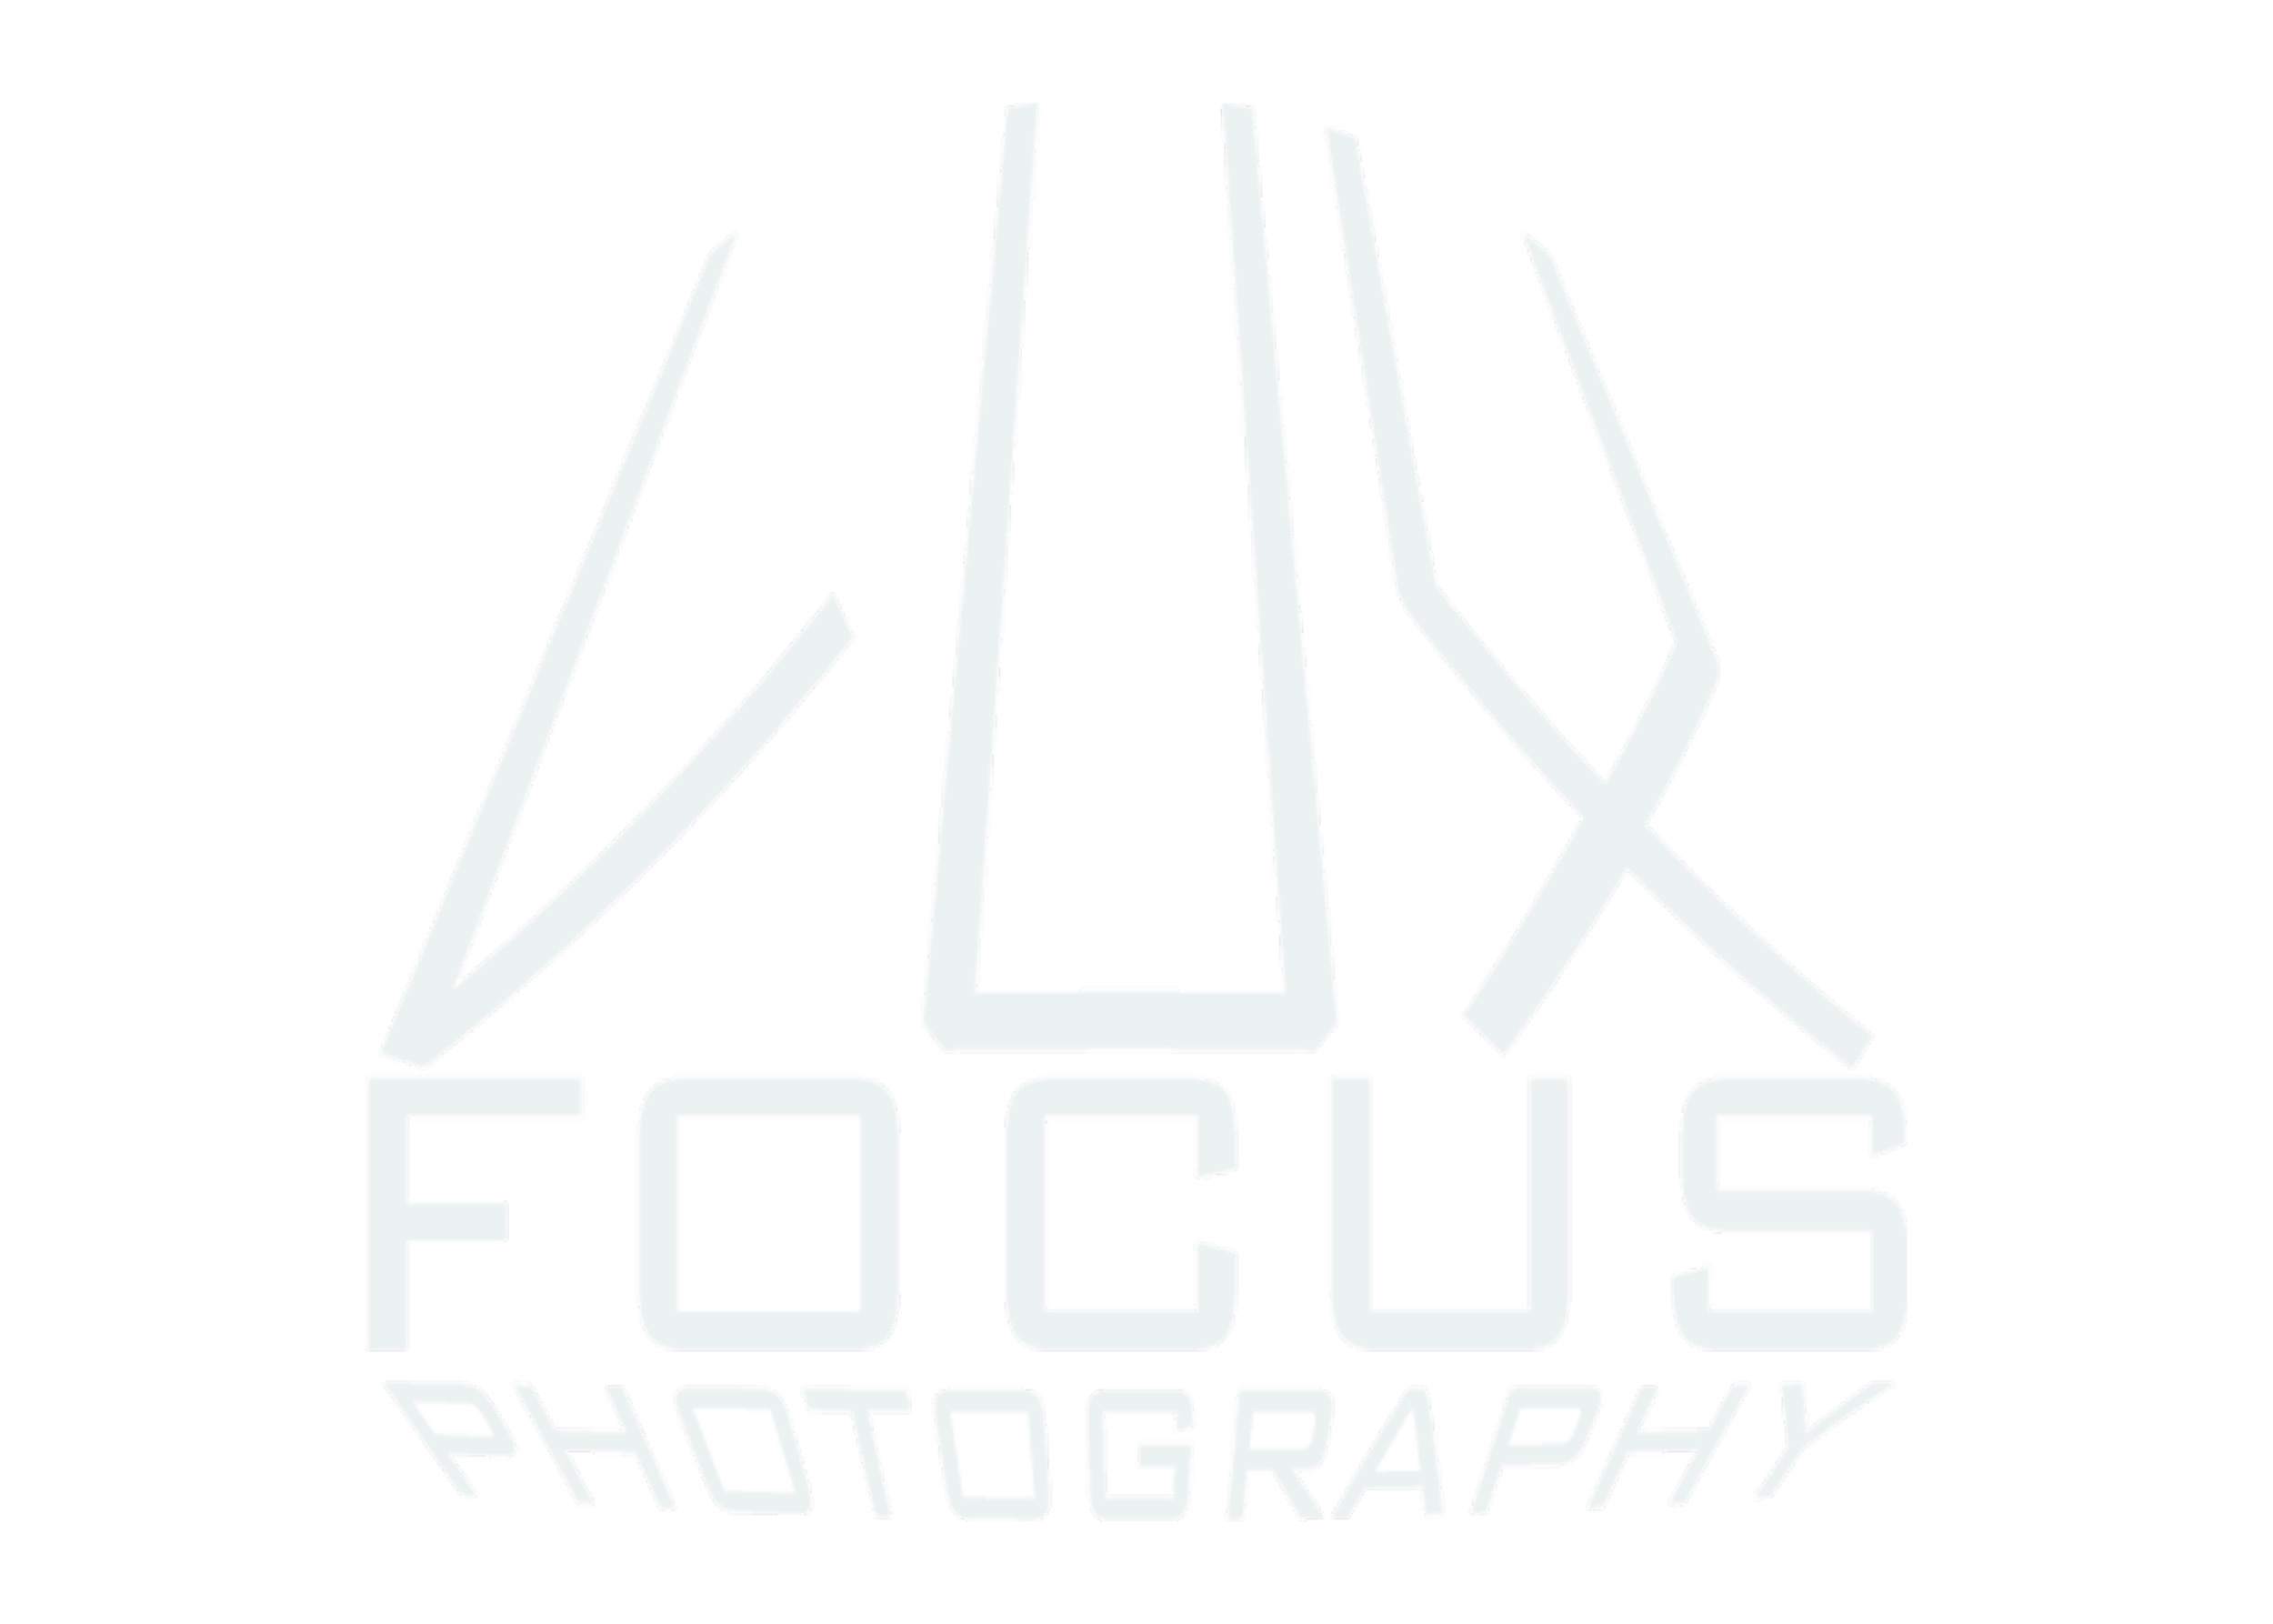 Lux Focus Photography